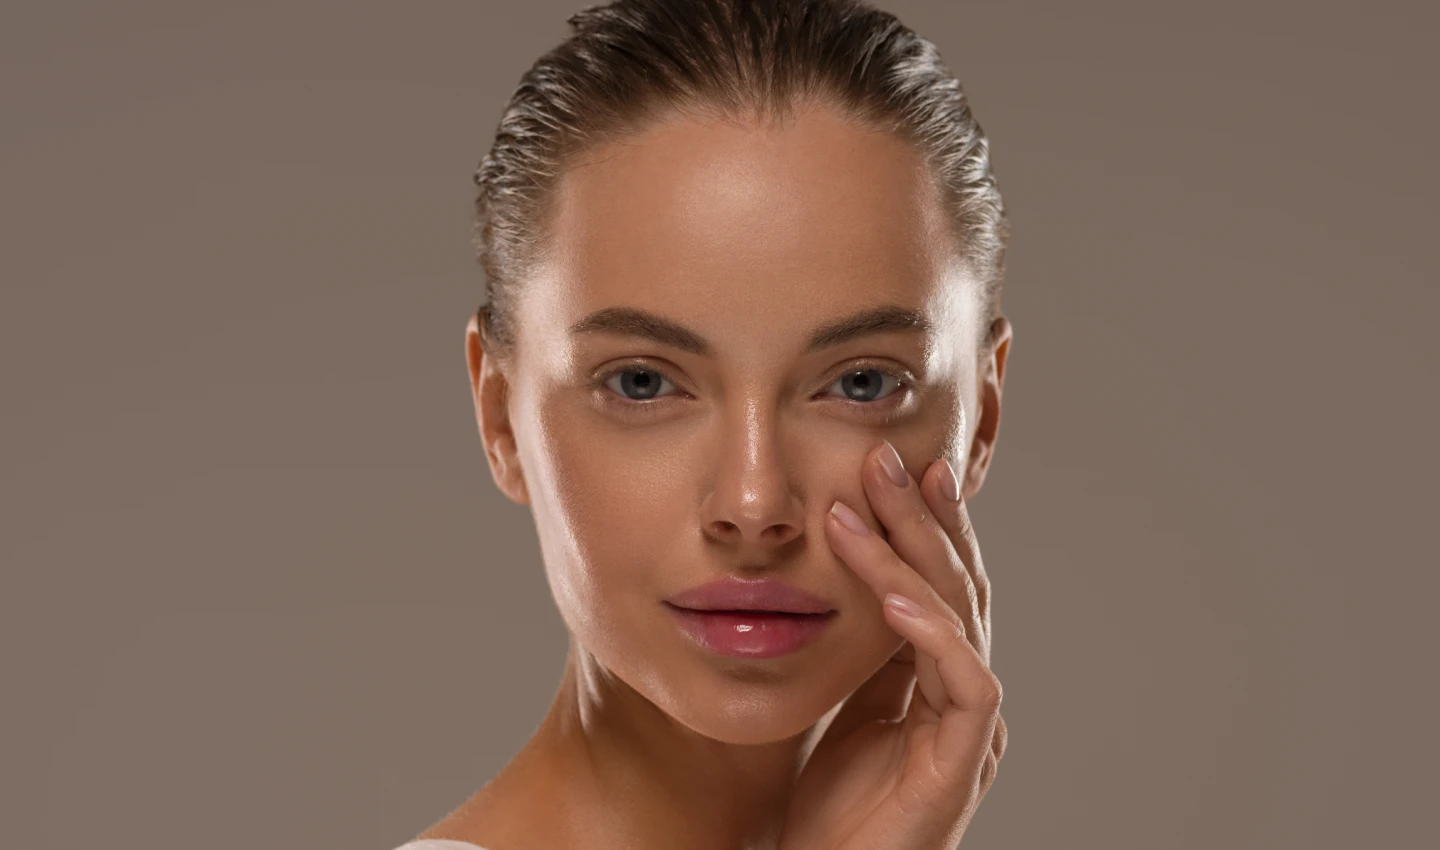 Glowy Skin Makeup - Beauty Woman with Hands, Healthy Natural Make-up, Clean Fresh Skin Concept, Color Background